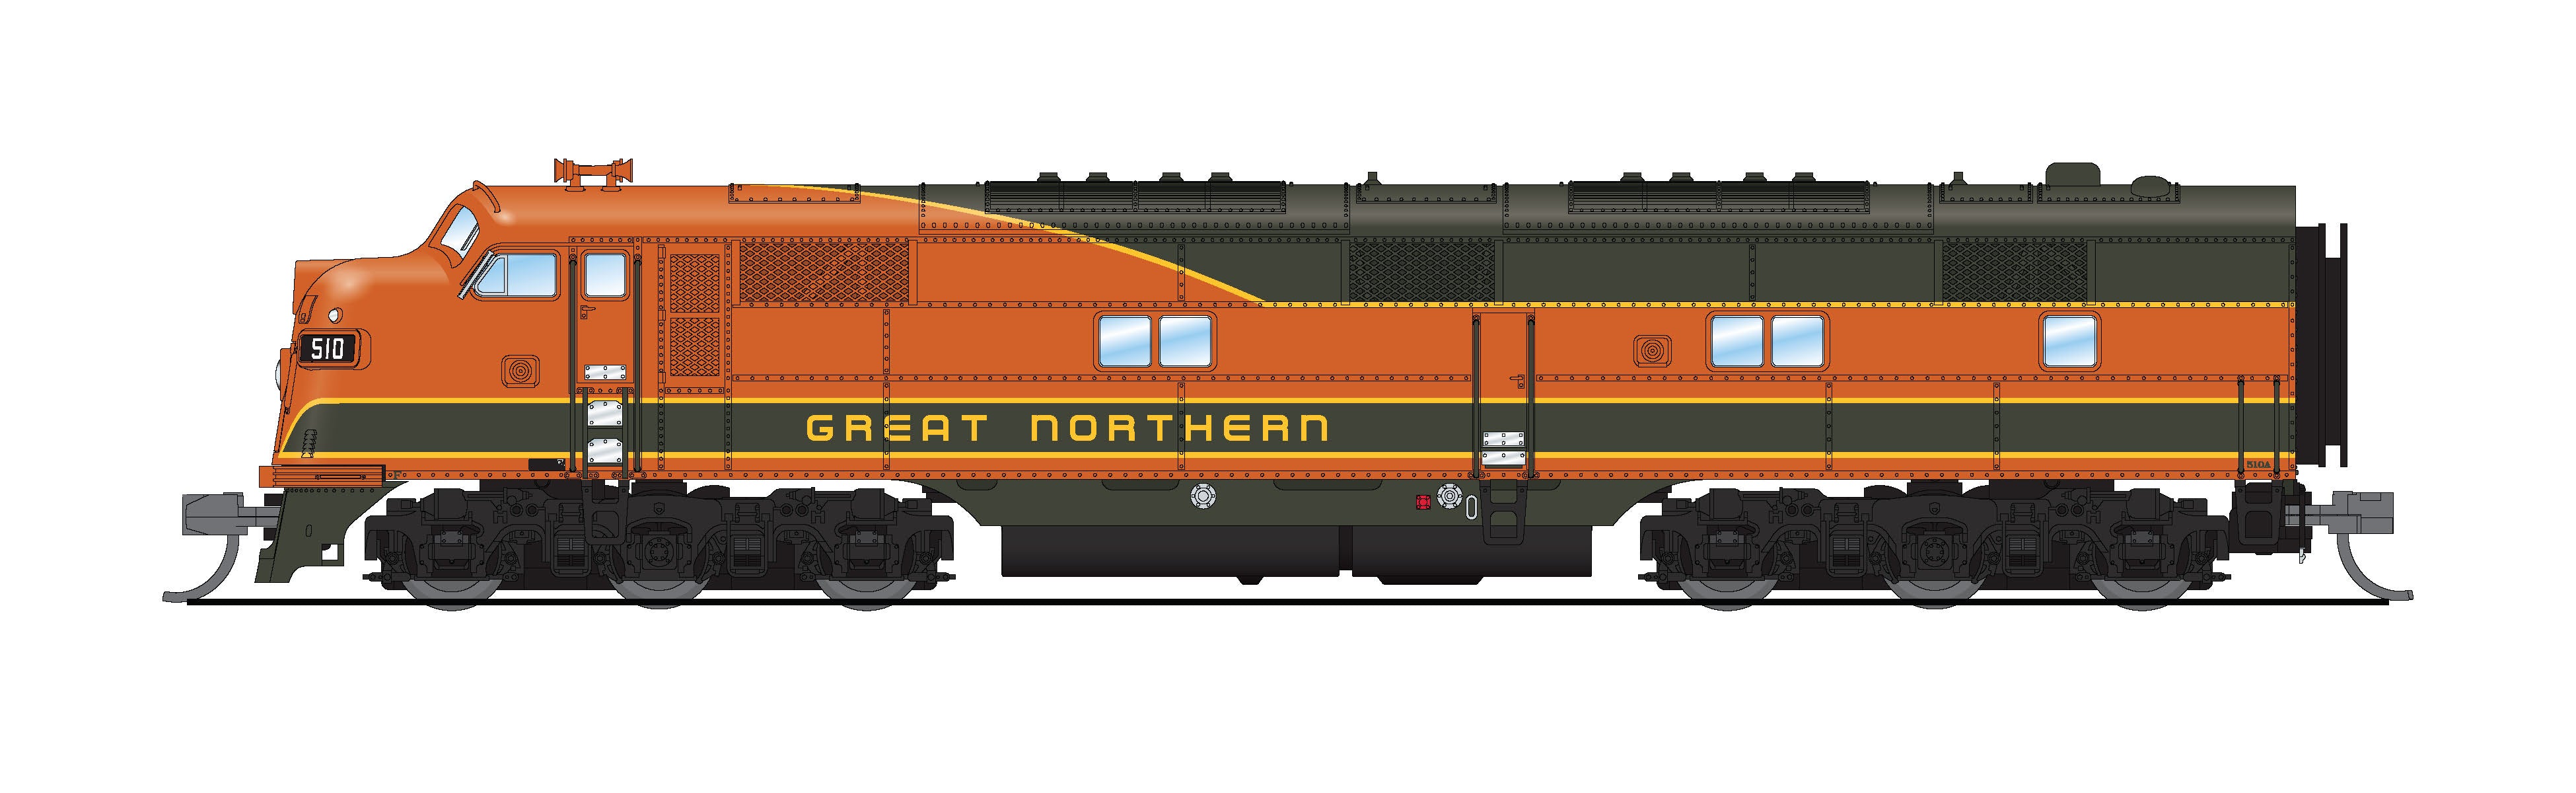 8804 EMD E7A, GN 510, Empire Builder, No-Sound / DCC-Ready, N (Lowell Smith Exclusive)